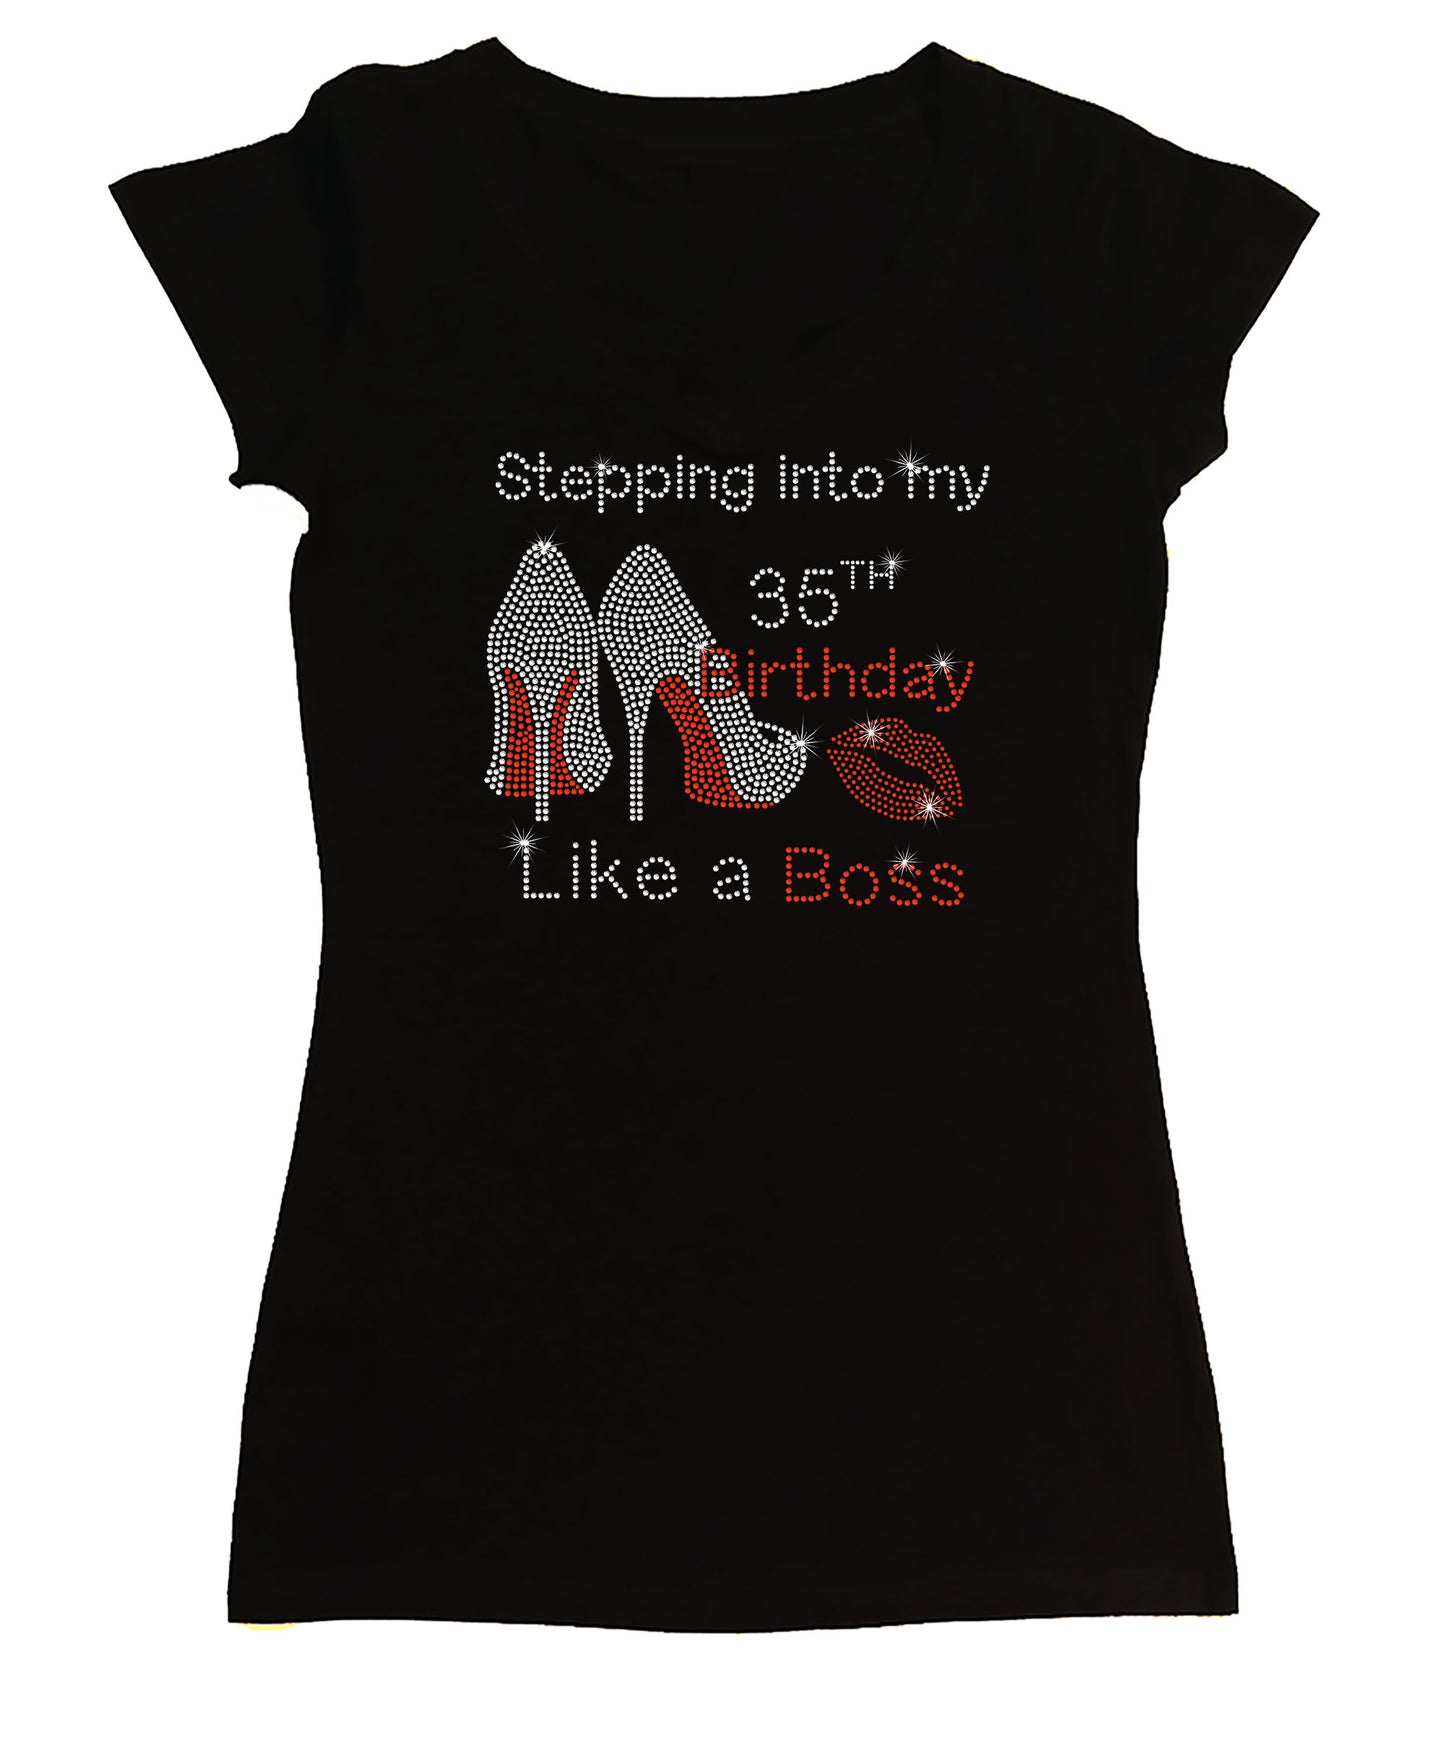 Women's Rhinestone Fitted Tight Snug Shirt Stepping into My Birthday Like a Boss - with Heels & Lips